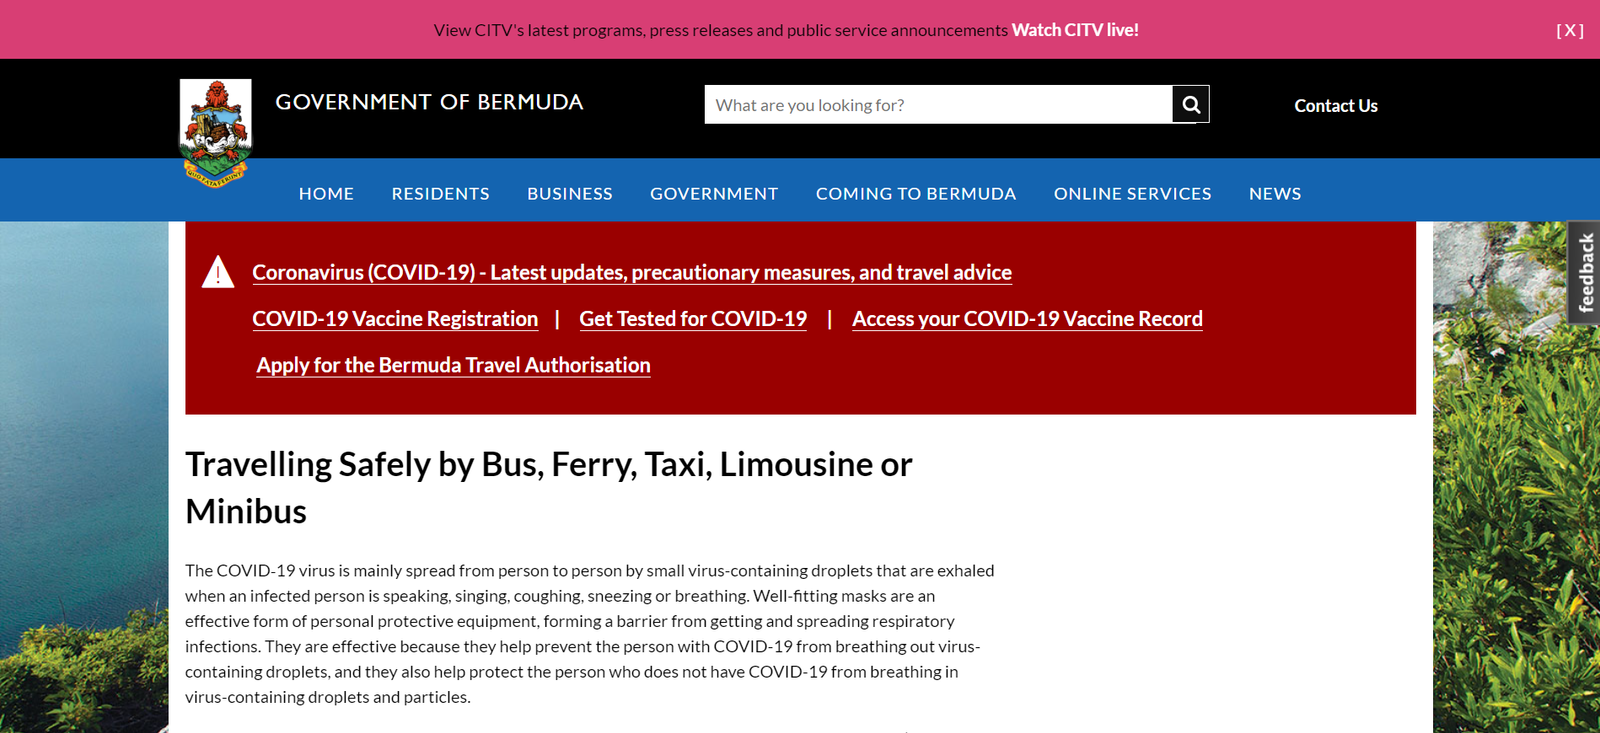 How to Request for Permitted Business during Covid-19 In Bermuda